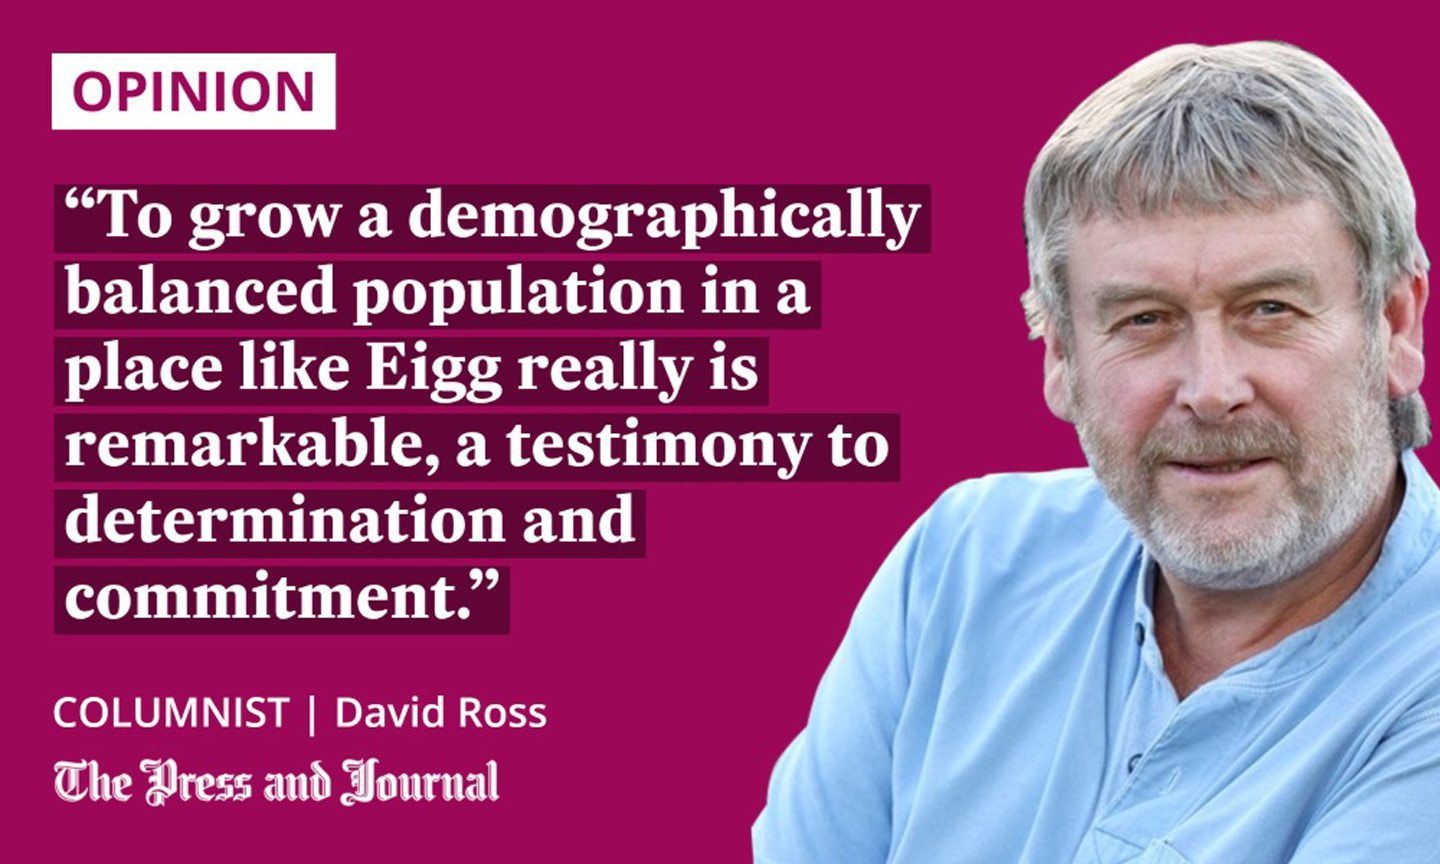 Columnist, David Ross: "To grow a demographically balanced population in a place like Eigg really is remarkable, a testimony to determination and commitment."